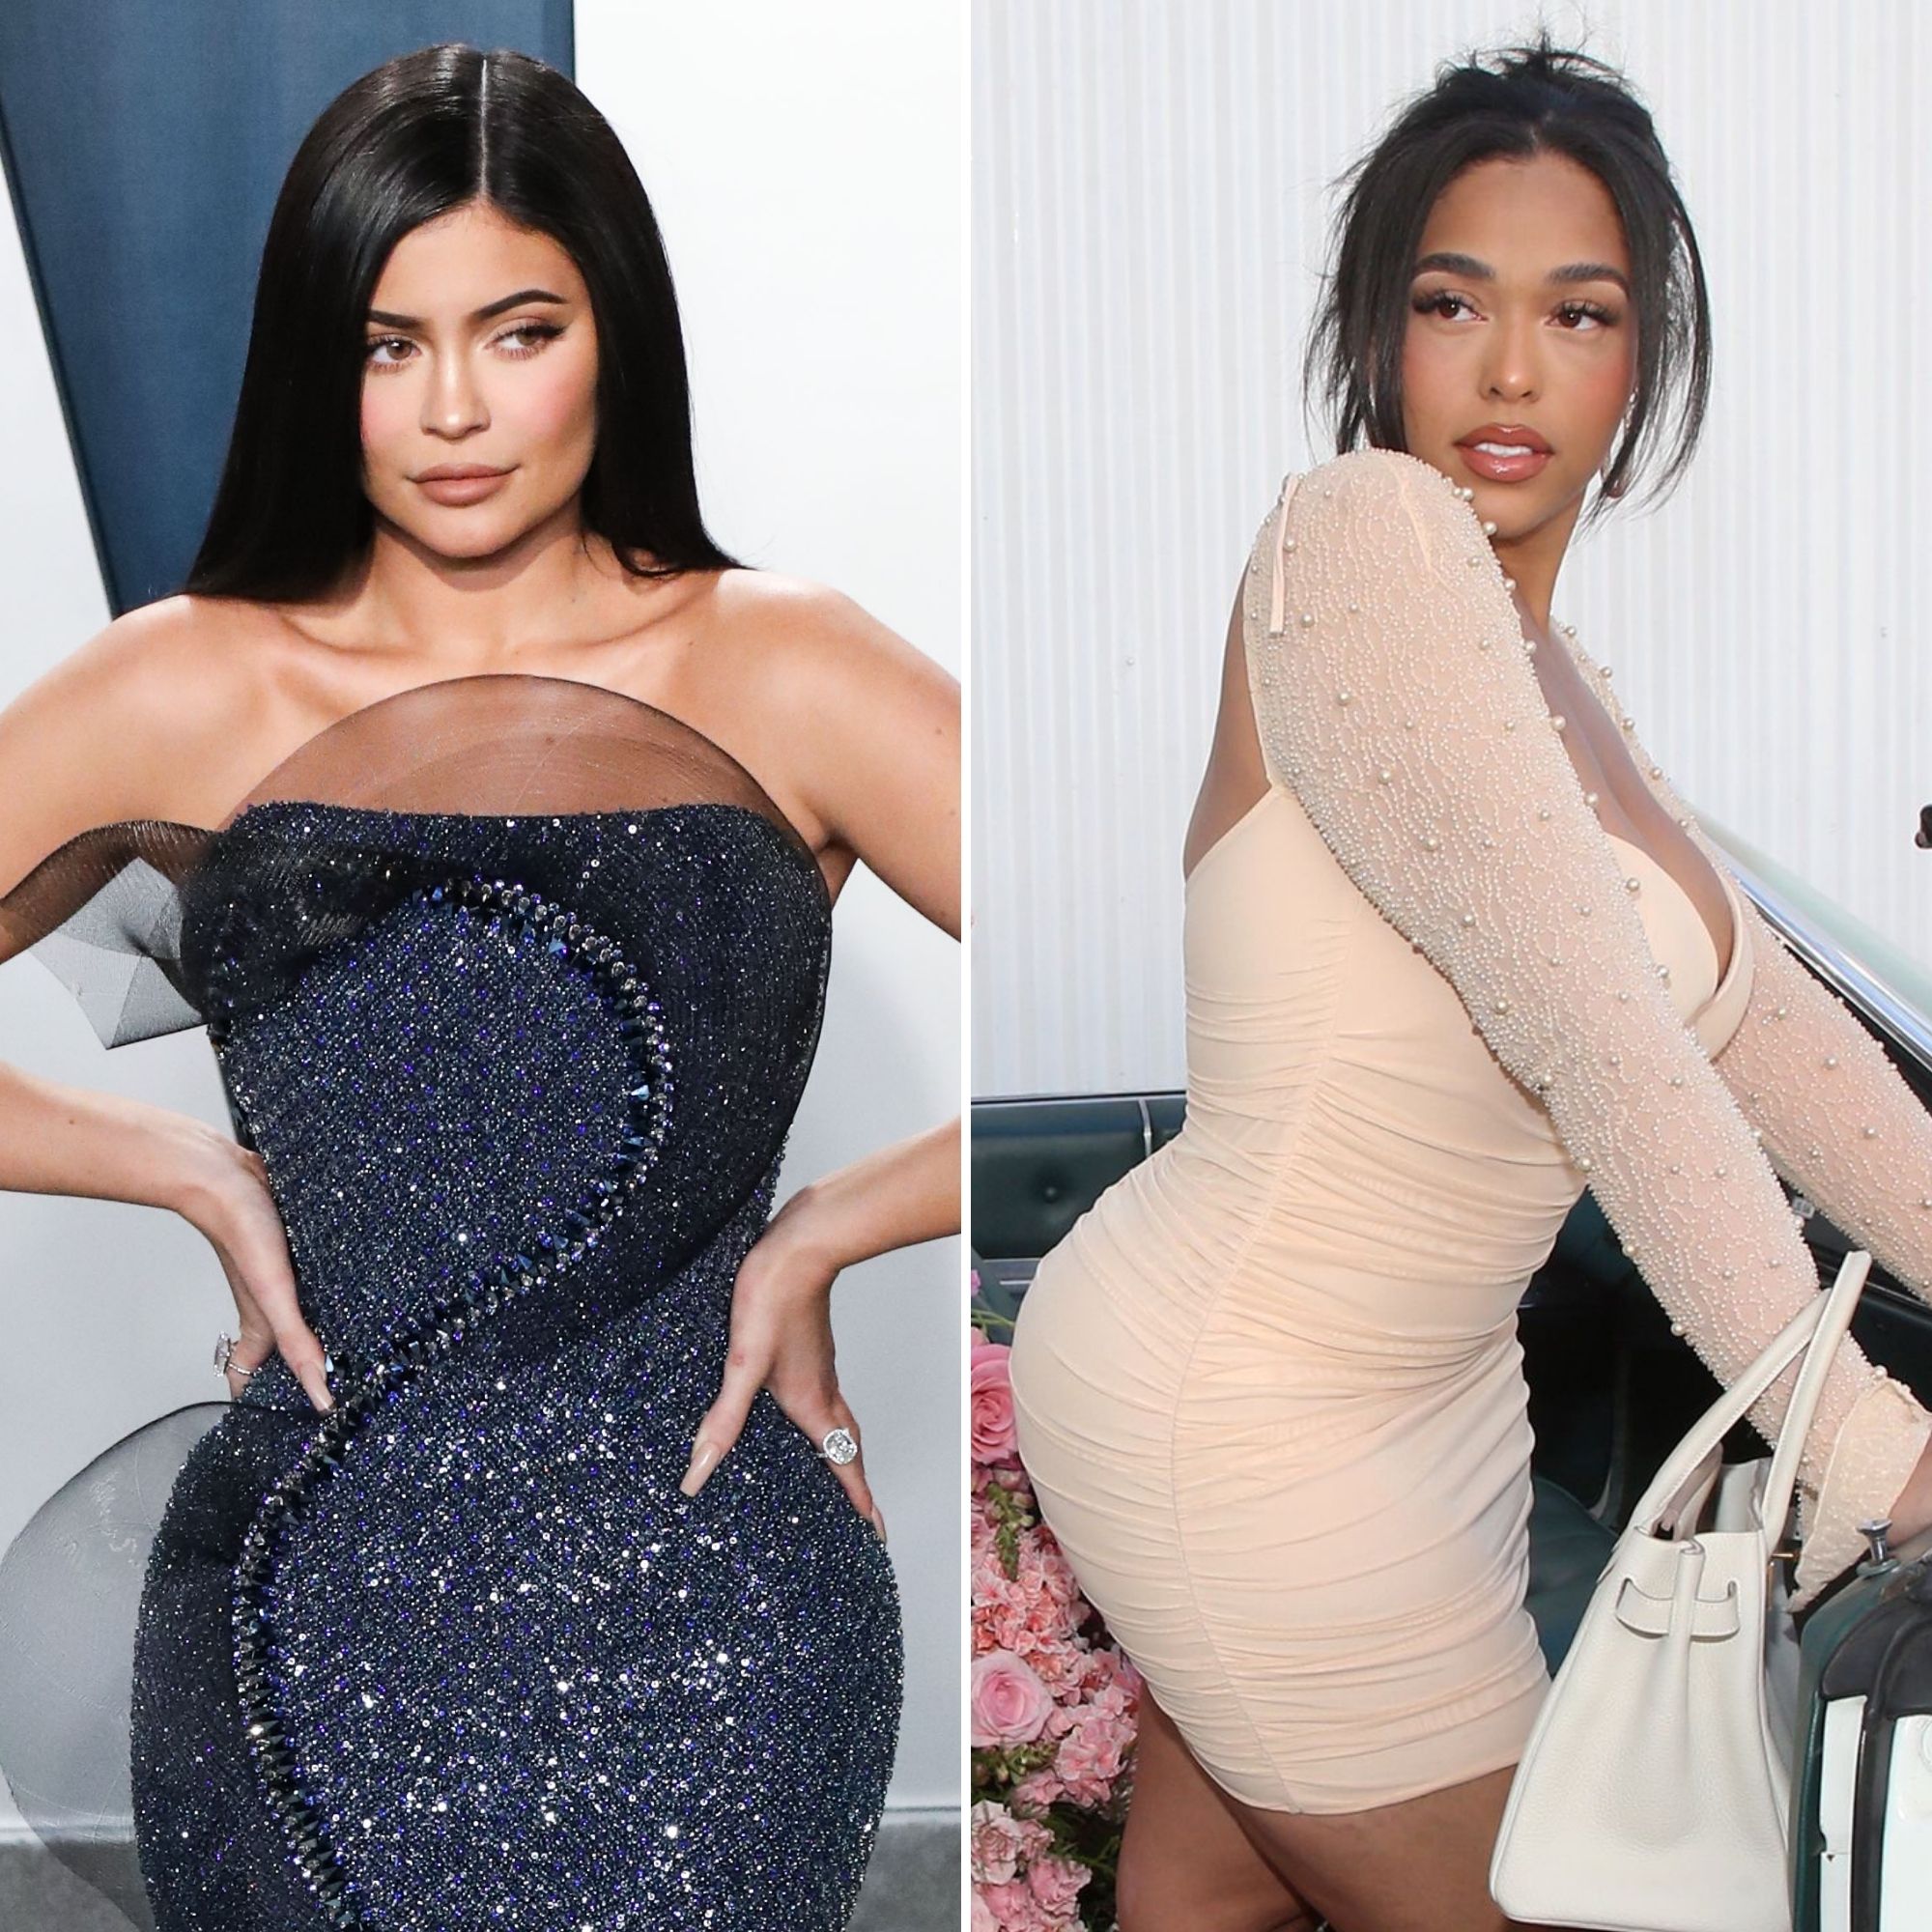 Kylie Jenner reunites with Jordyn Woods in new TikTok and fans call it 'the  craziest hard launch ever